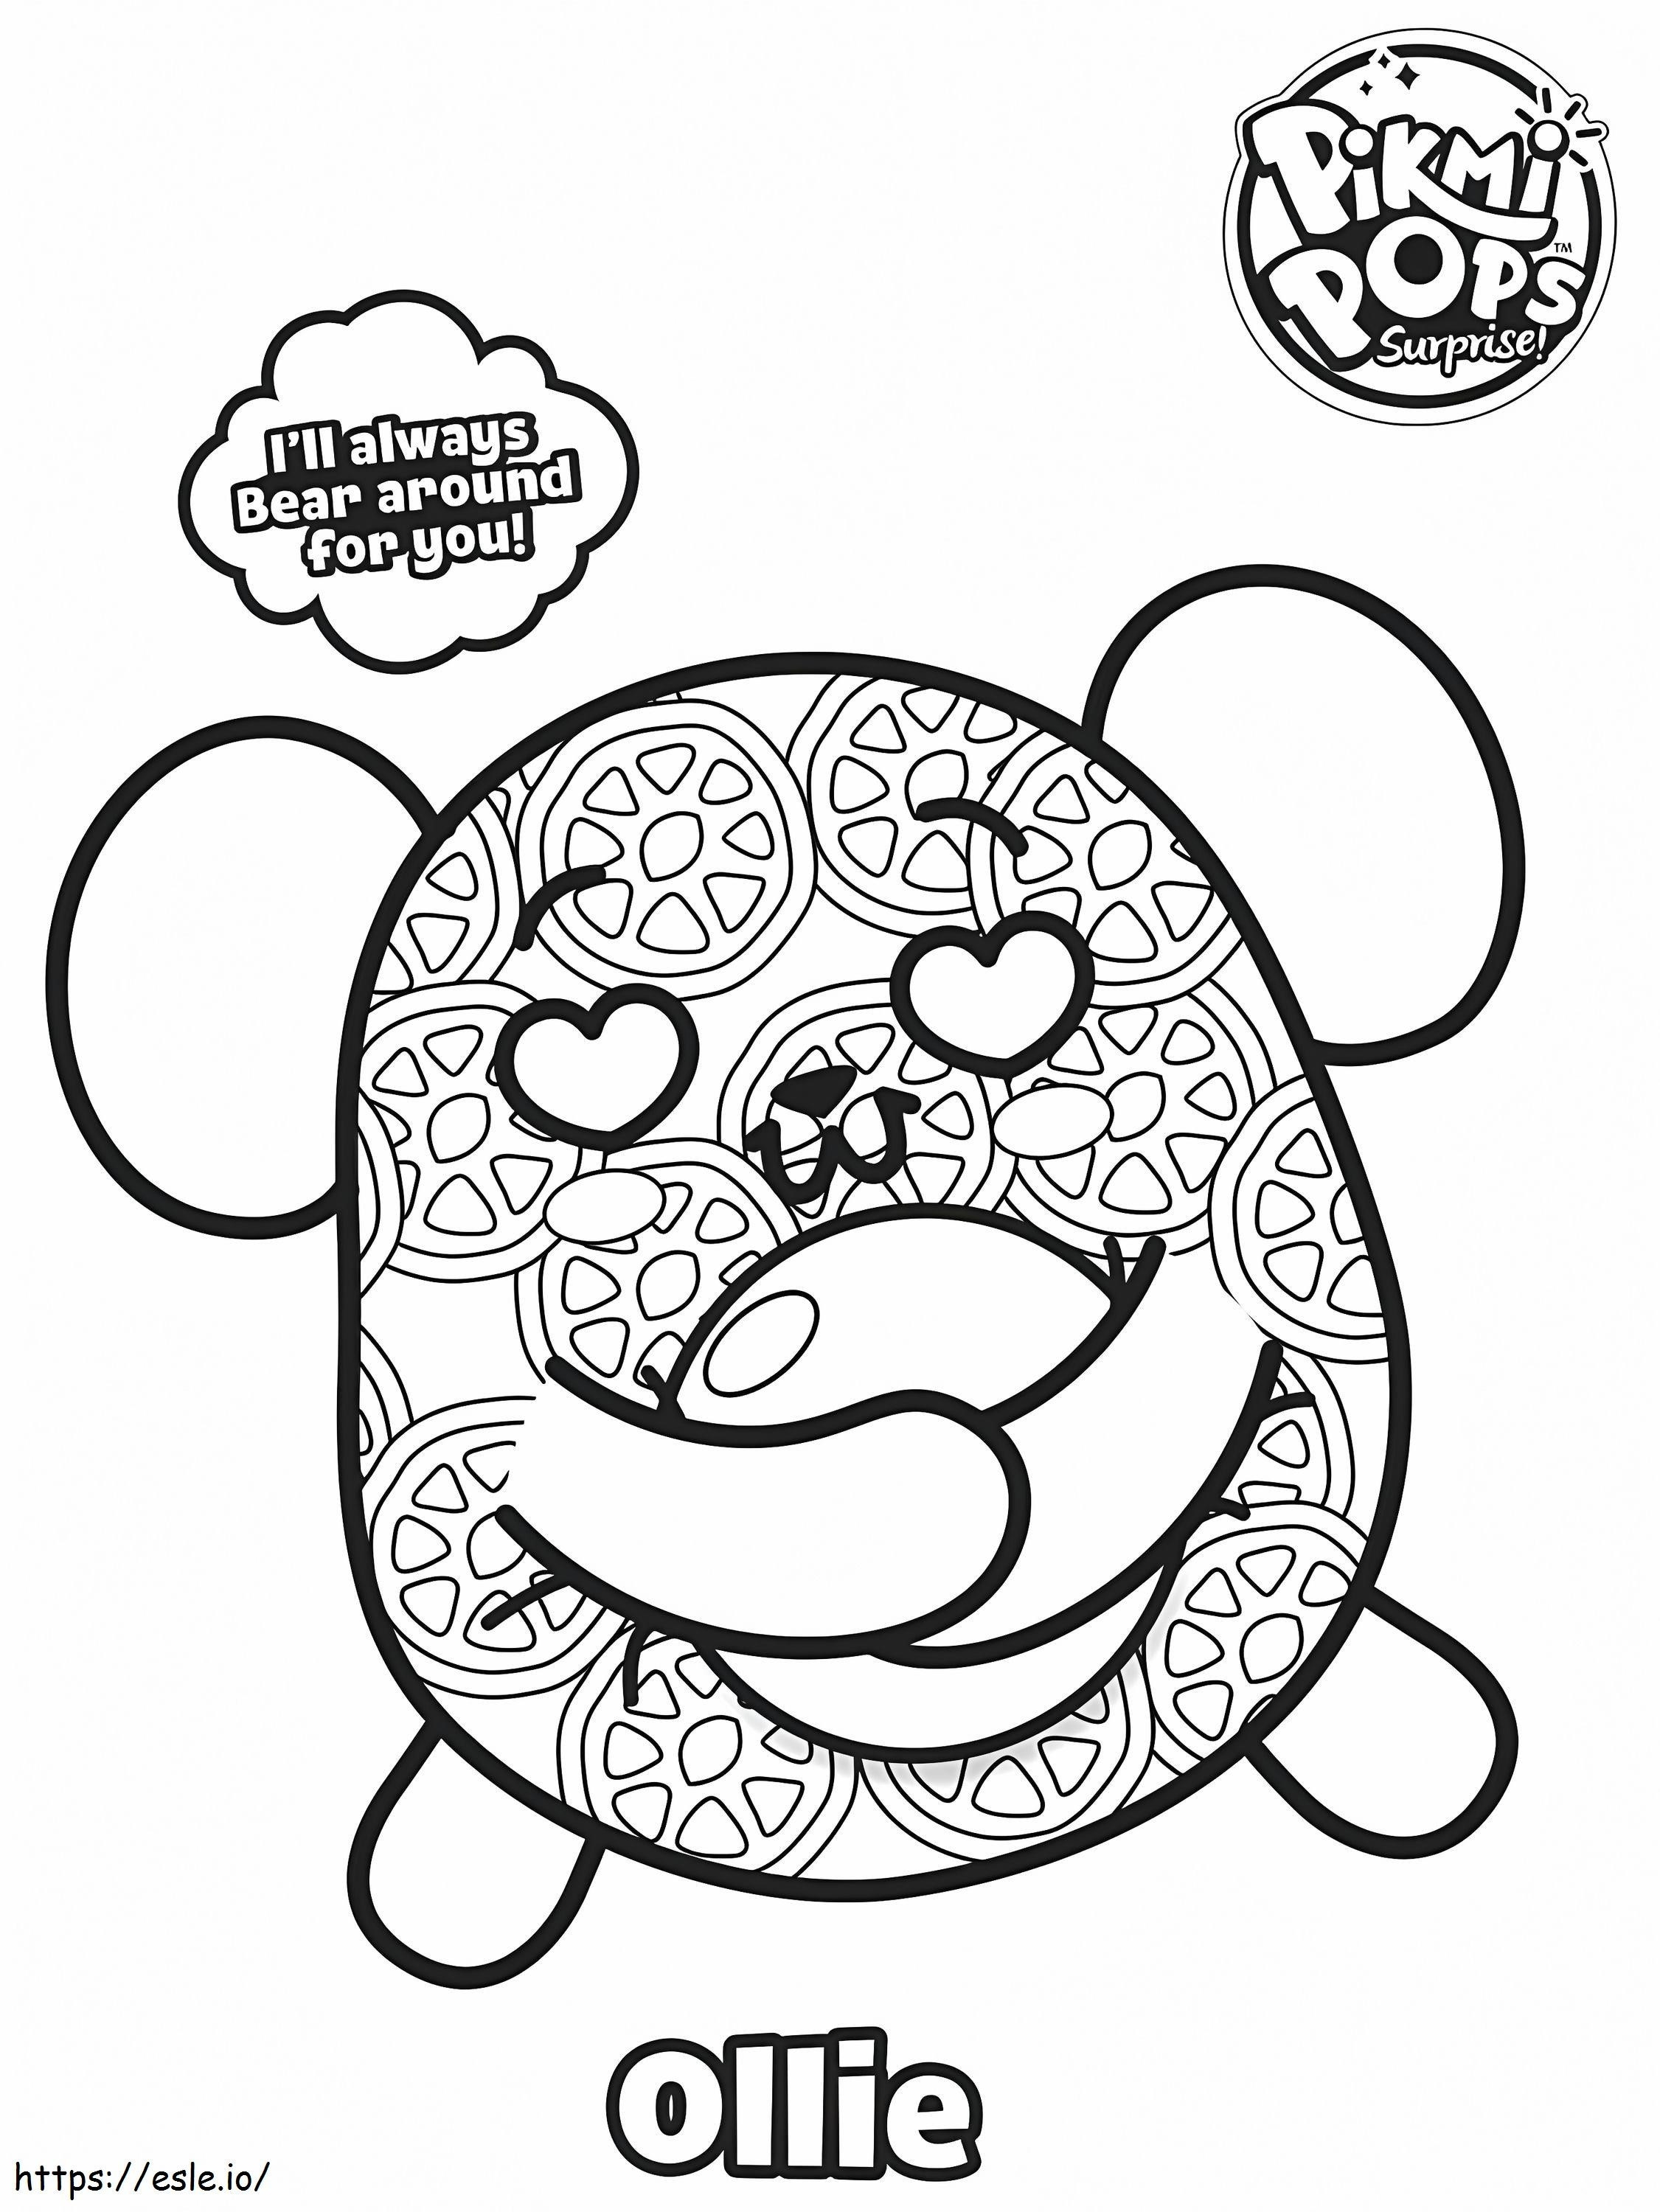 1596154702 Pps1 Colouringsheet Ollie coloring page